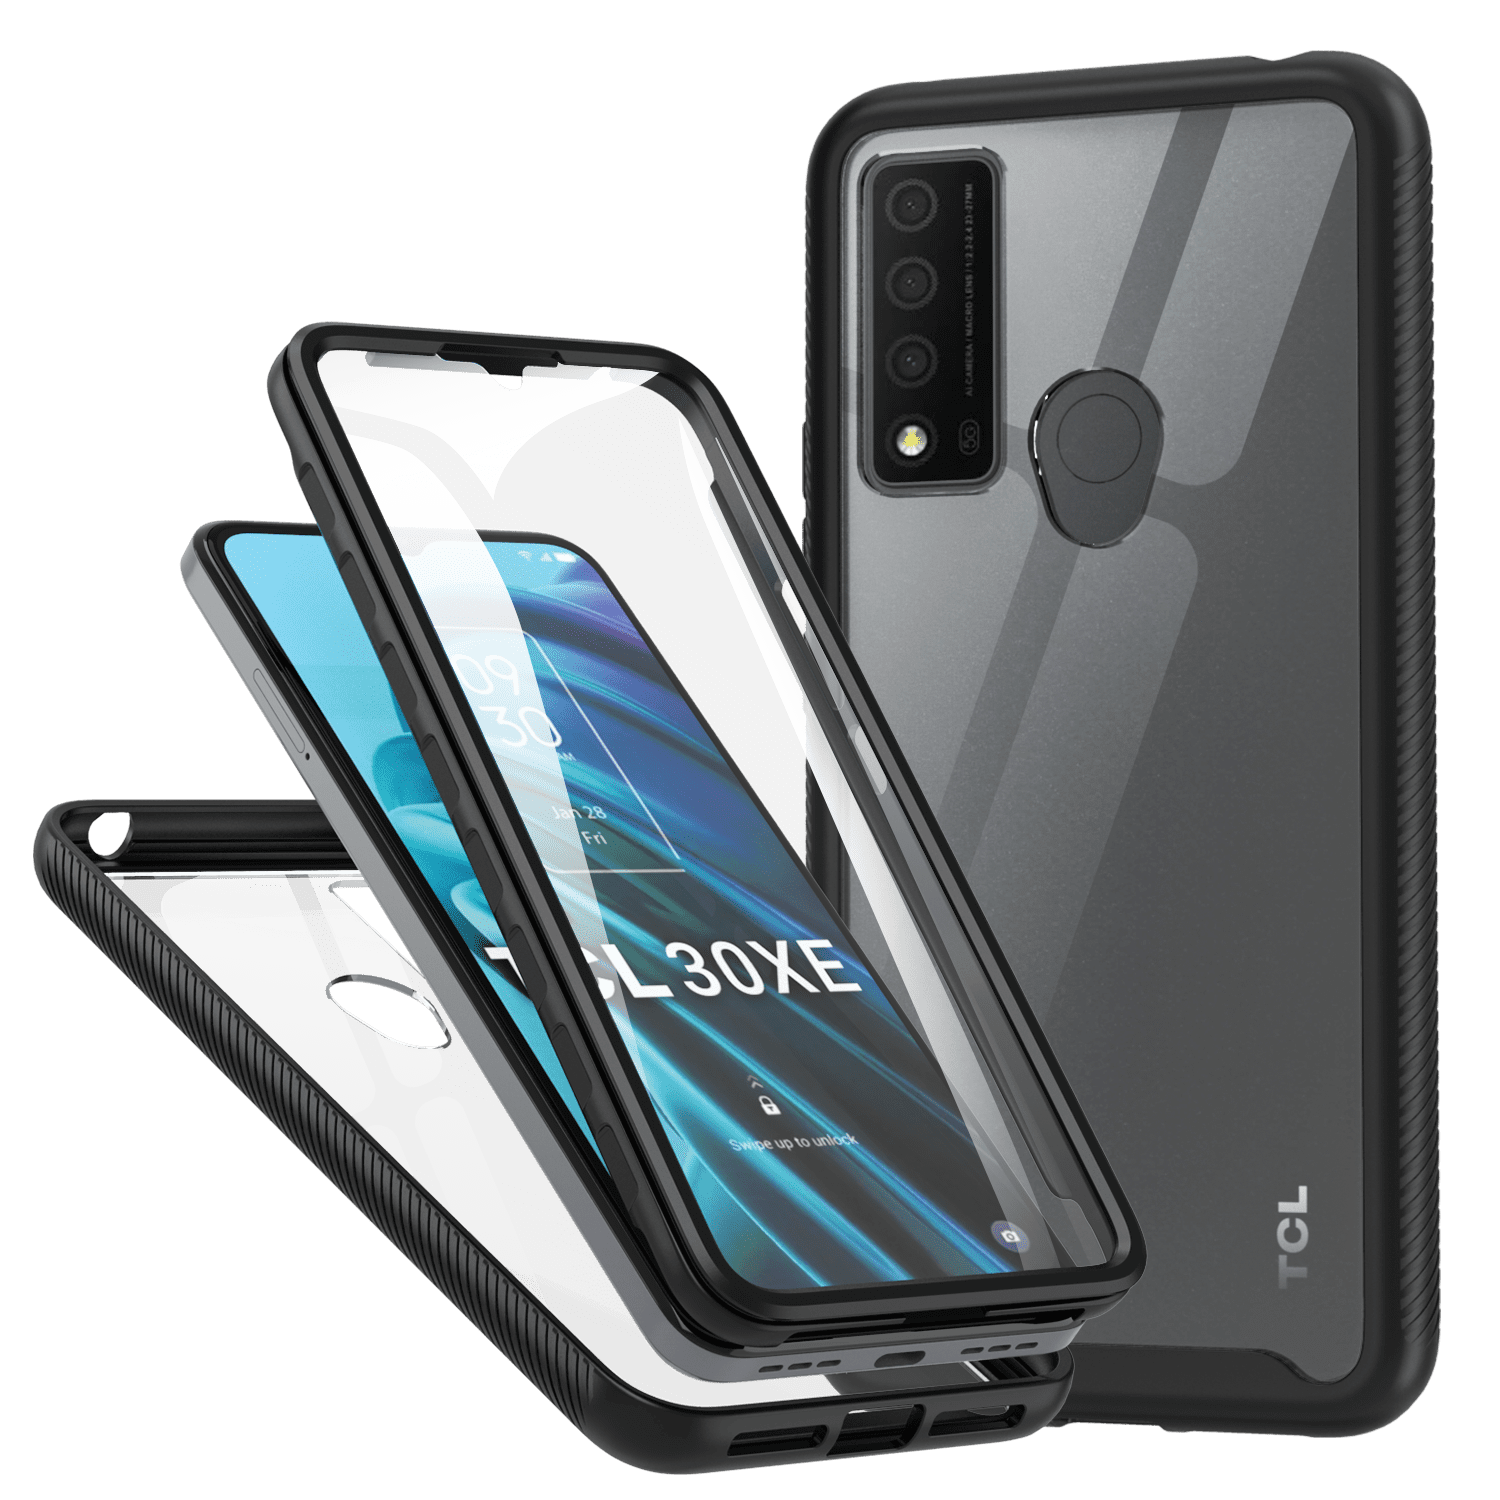  MAOUICI Case for TCL 40 NXTpaper 5G (6.56 inches),Black Shell  Case for TCL 40 NXTpaper 5G with 6 Tempered Glass Screen Protector : Cell  Phones & Accessories